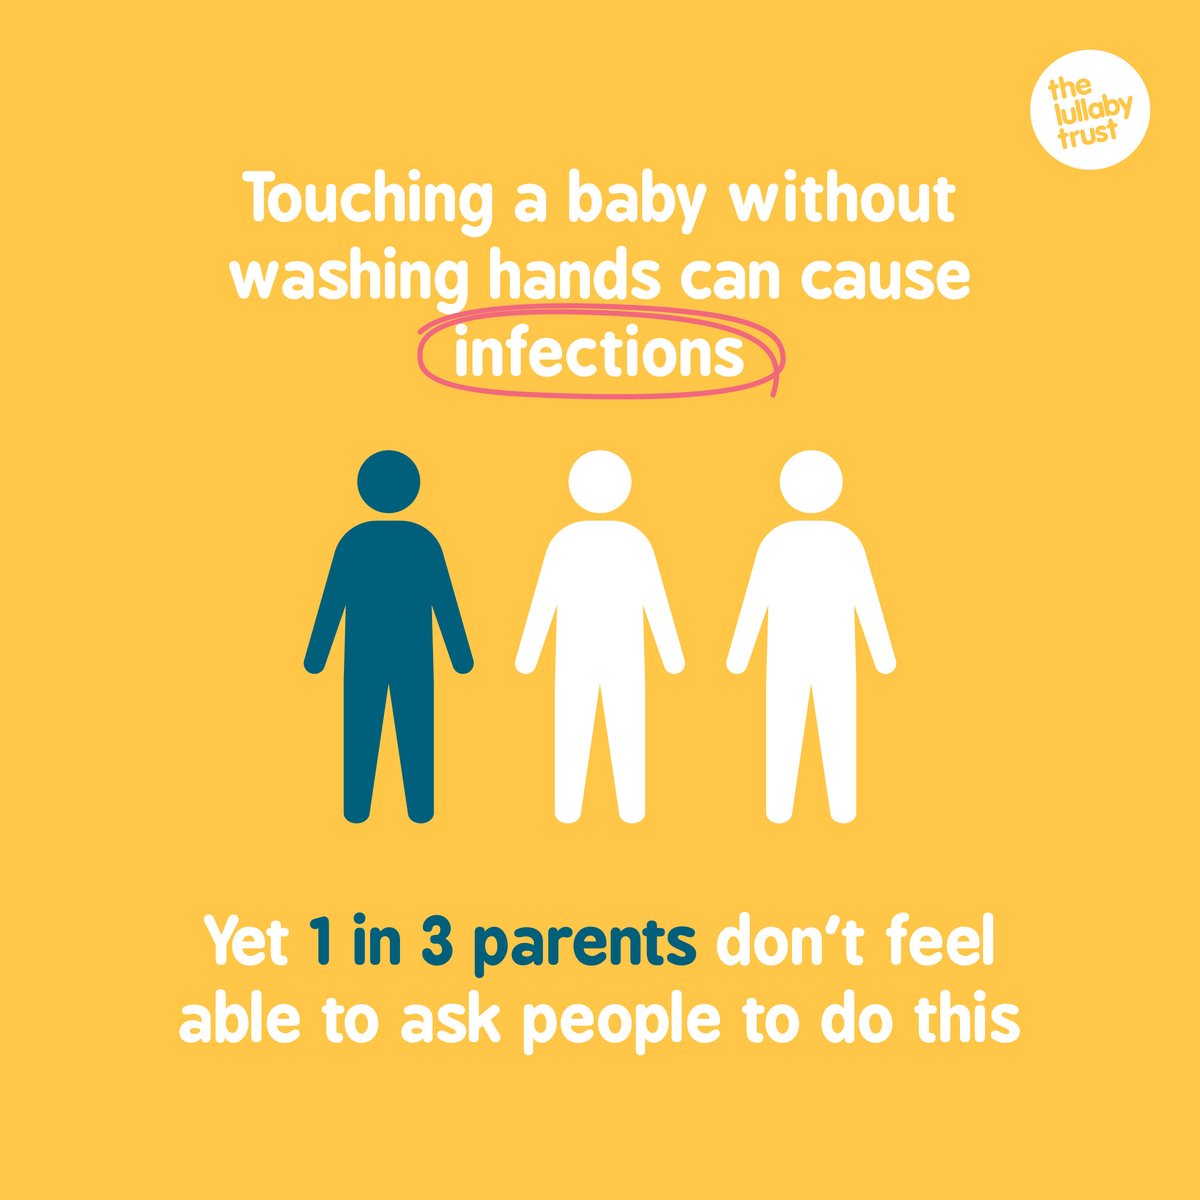 1 in 3 parents wouldn’t ask people to wash their hands before letting them hold their new baby. But infections that are considered mild (e.g. cold sore virus) can be life-threatening to babies. All visitors should avoid kissing young babies & wash their hands before touching.